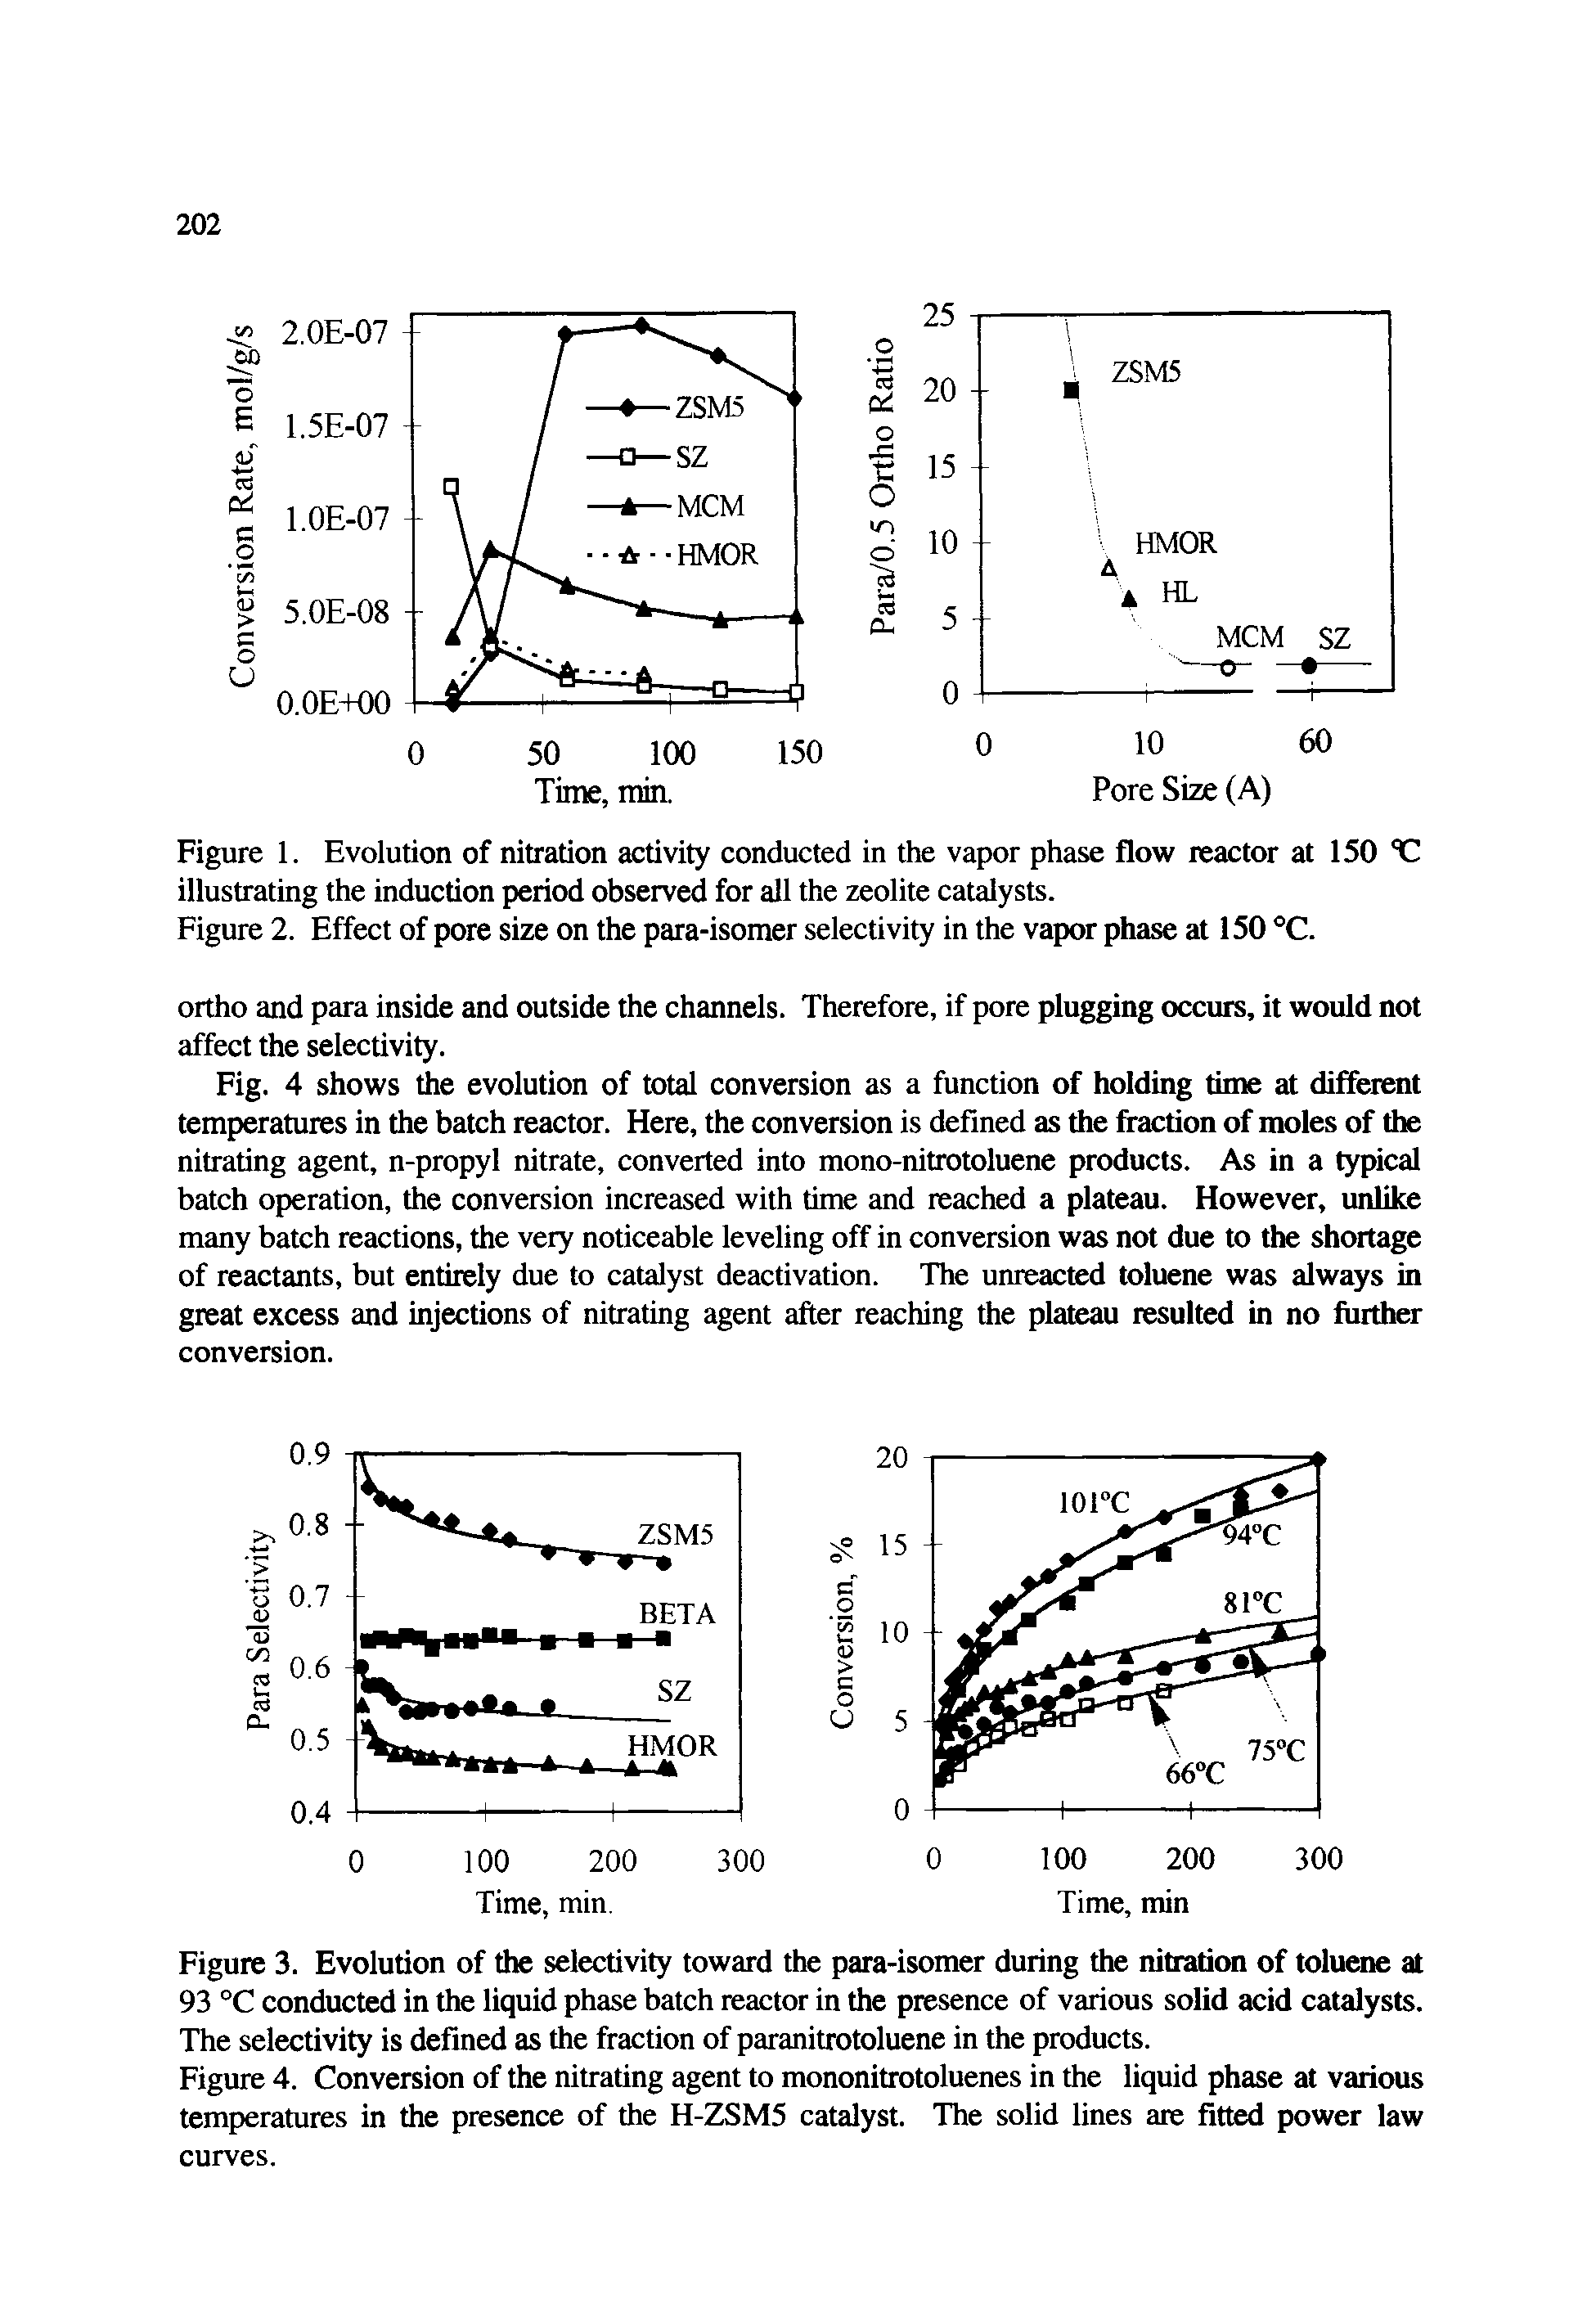 Figure 1. Evolution of nitration activity conducted in the vapor phase flow reactor at 150 C illustrating the induction period observed for all the zeolite catalysts.